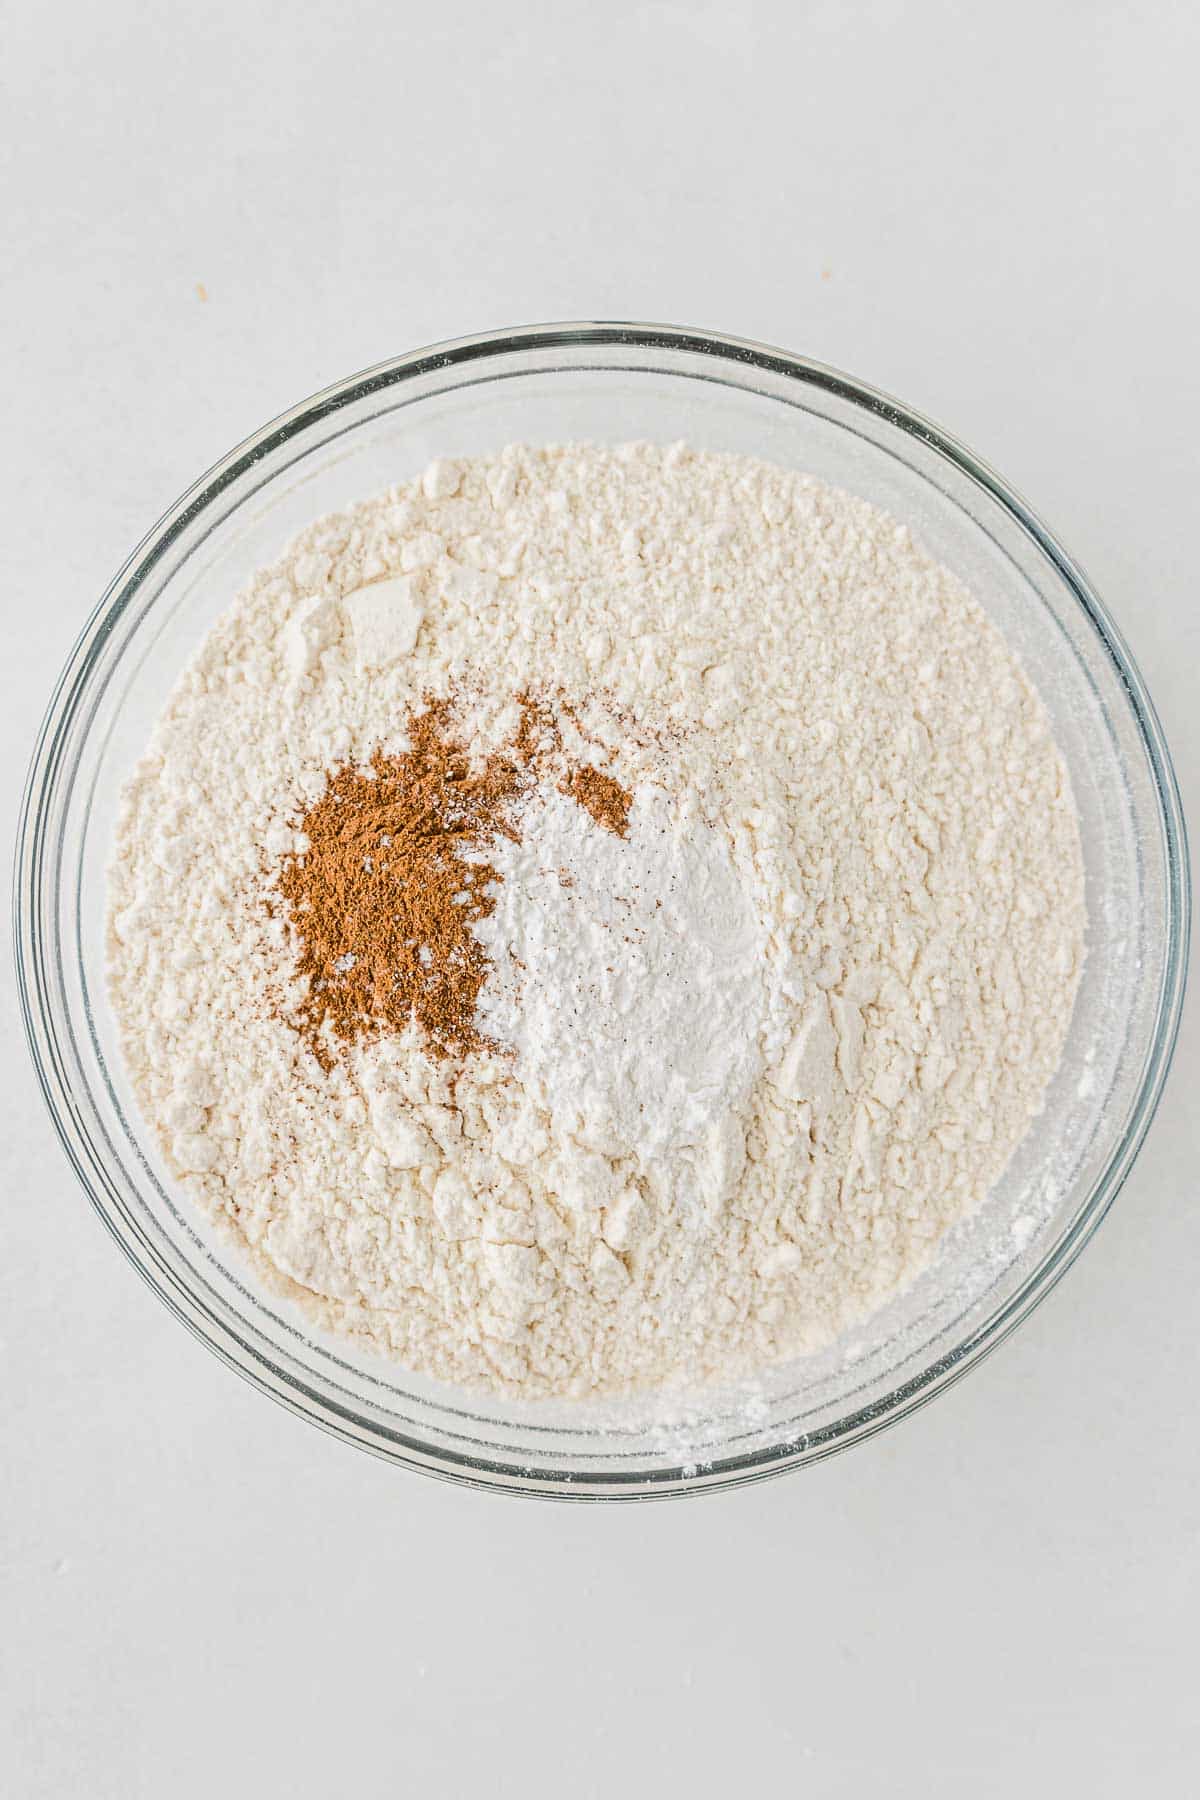 glass mixing bowl with flour and cinnamon.